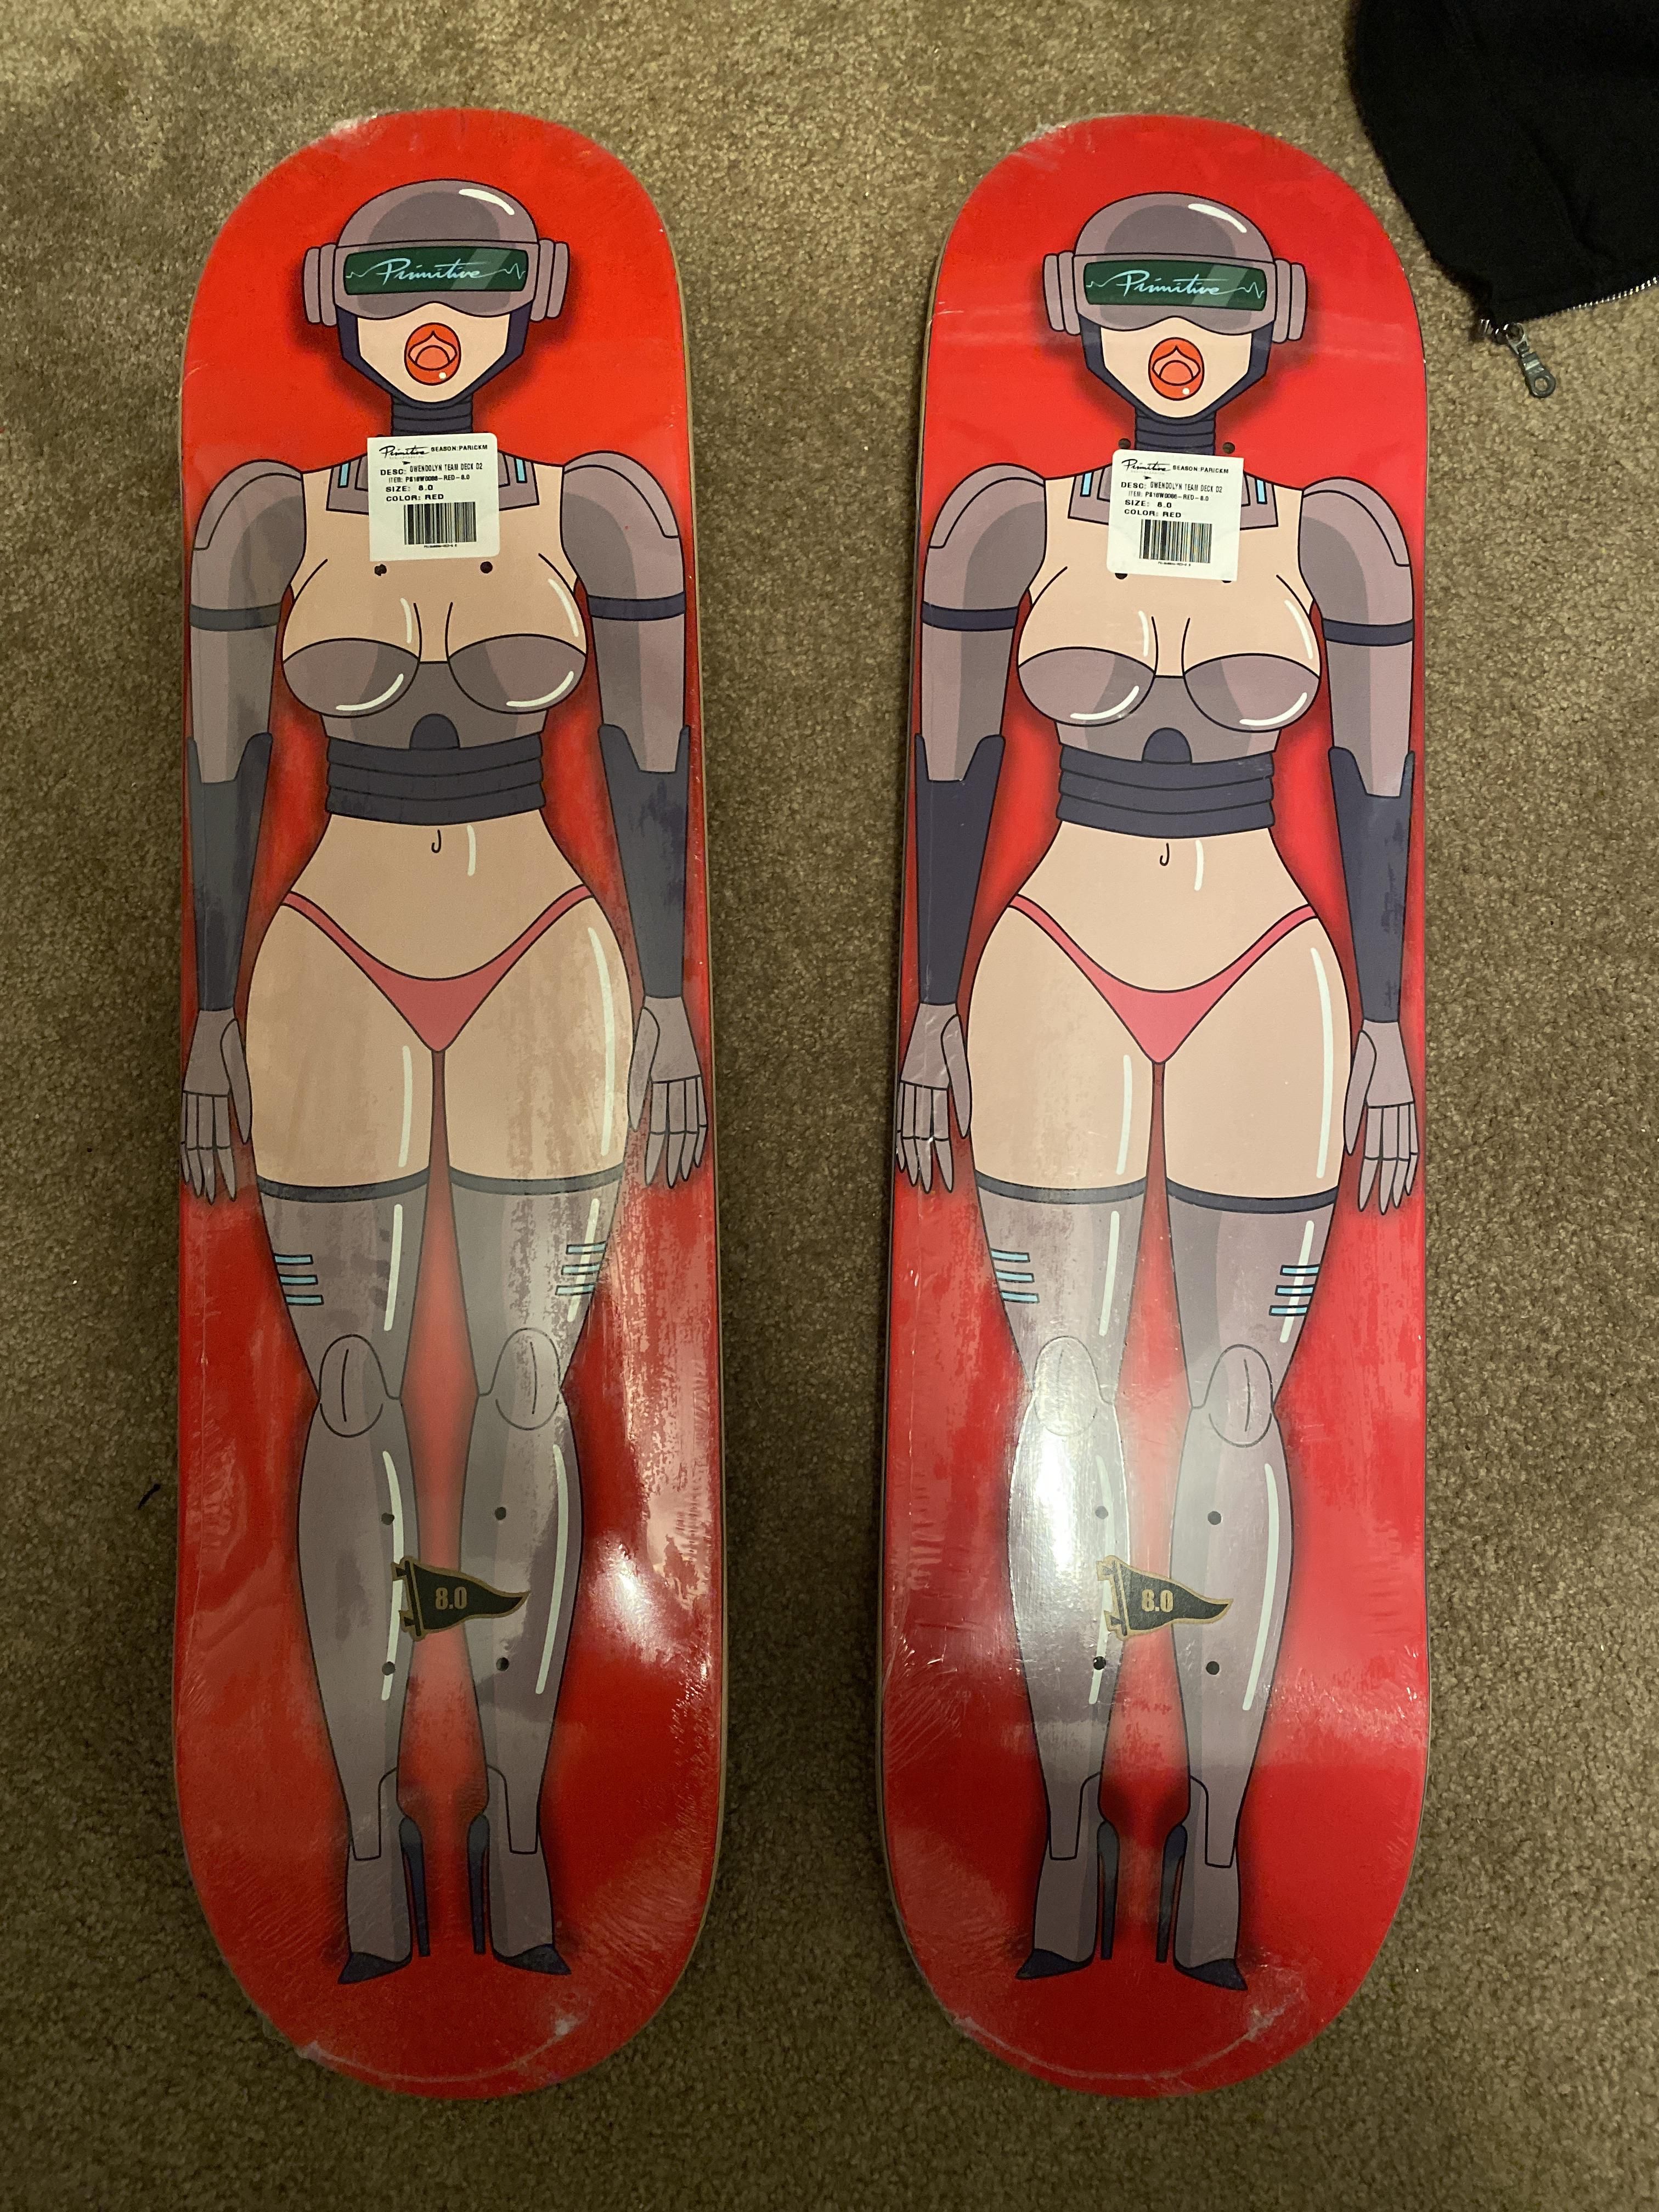 Ordered ‘mystery decks’ for my 6 year old son & 11 year old daughter from a skateboard company and these are what we got in the mail today.